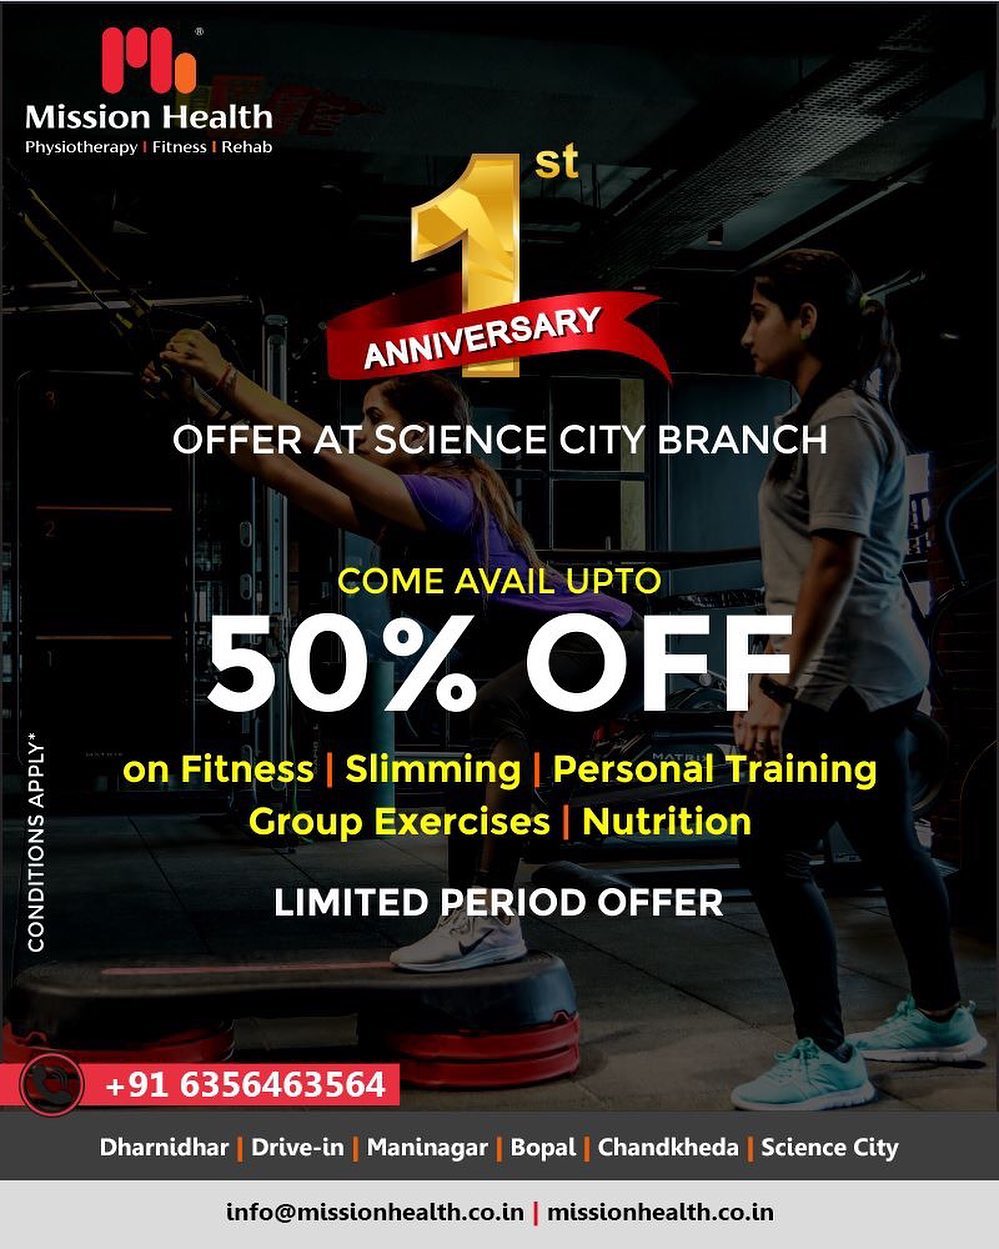 Let fitness be your priority, avail exciting offer at our Science city branch as we celebrate its 1st anniversary! 
#Offer #OneYear #Celebration #MissionHealth #MissionHealthIndia #MovementIsLife